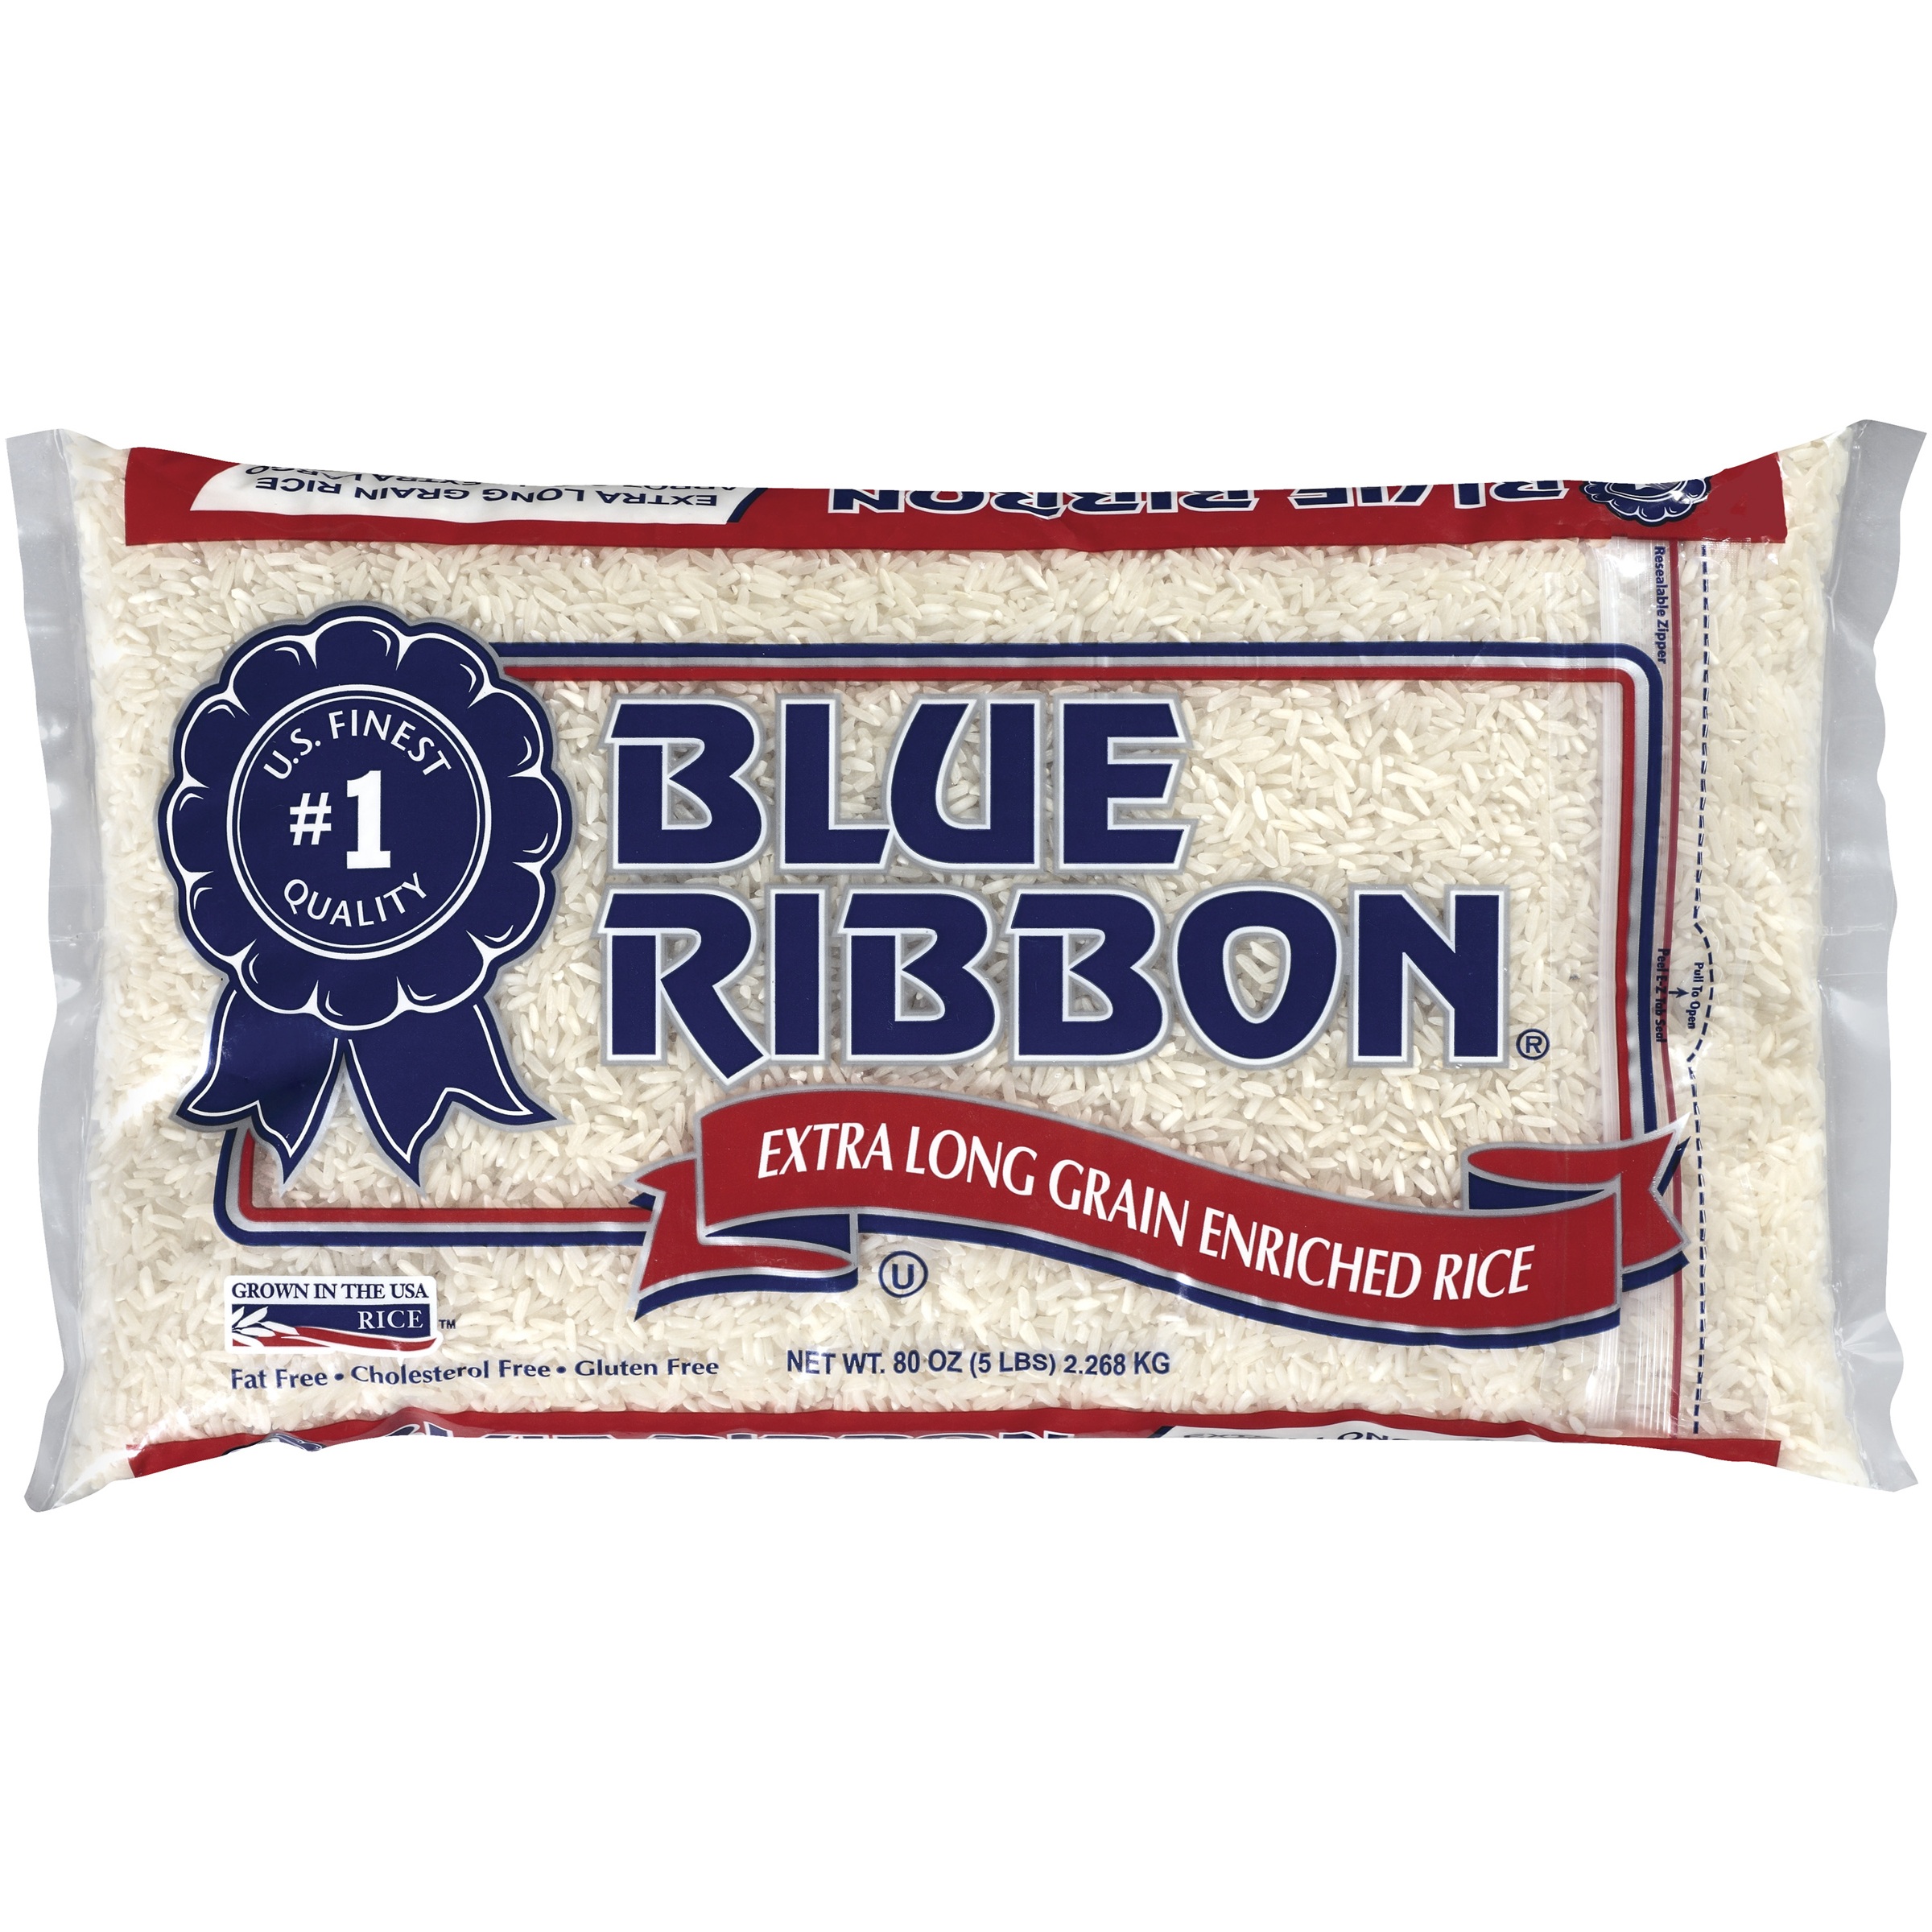 Blue Ribbon White Rice, Extra Long Grain Enriched Rice, 5 lb Bag - image 1 of 5